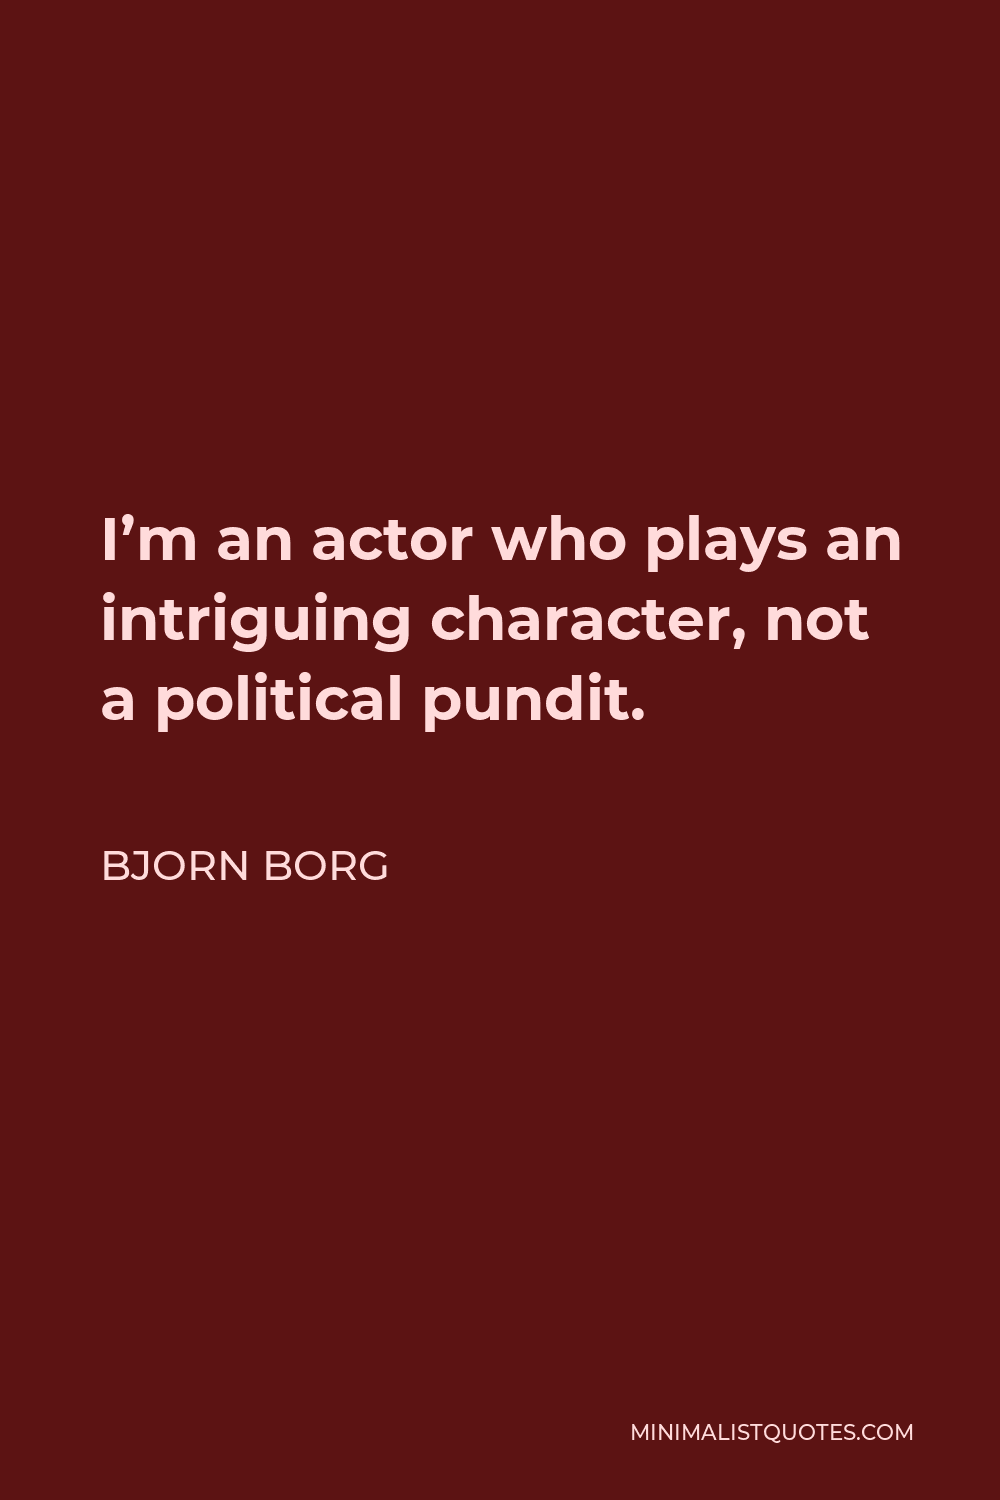 Bjorn Borg Quote - I’m an actor who plays an intriguing character, not a political pundit.